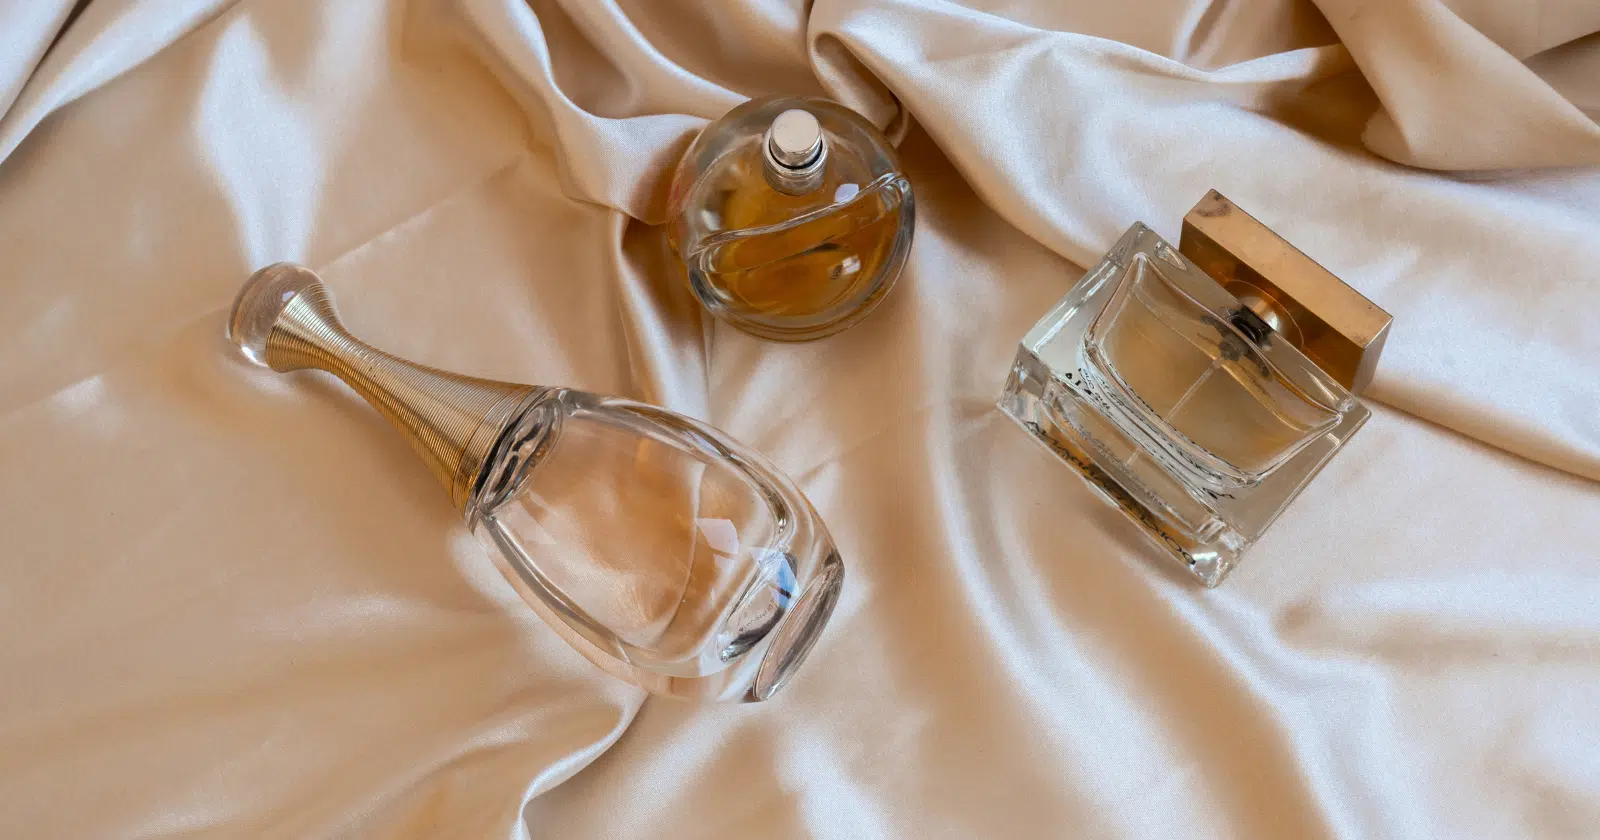 Perfume vs Cologne: Is There A Difference?